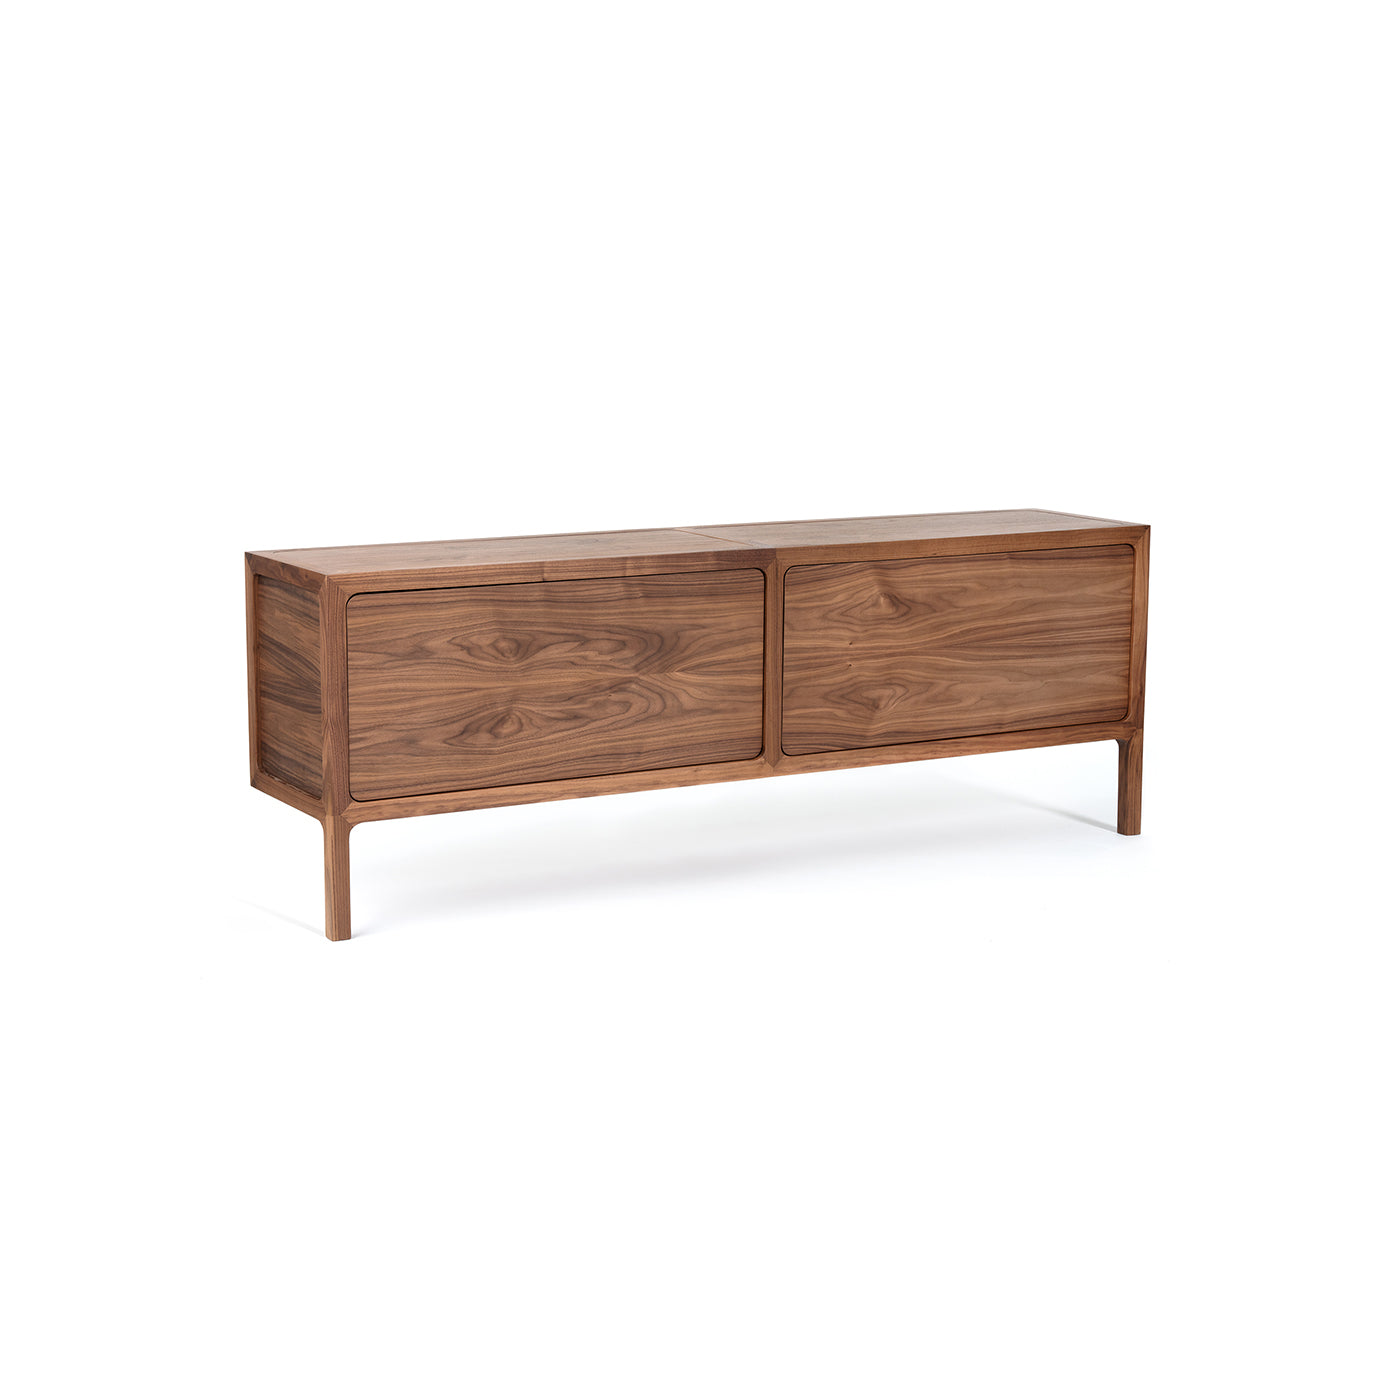 Less Sideboard with Drawers by Nicola Gisonda - Alternative view 1